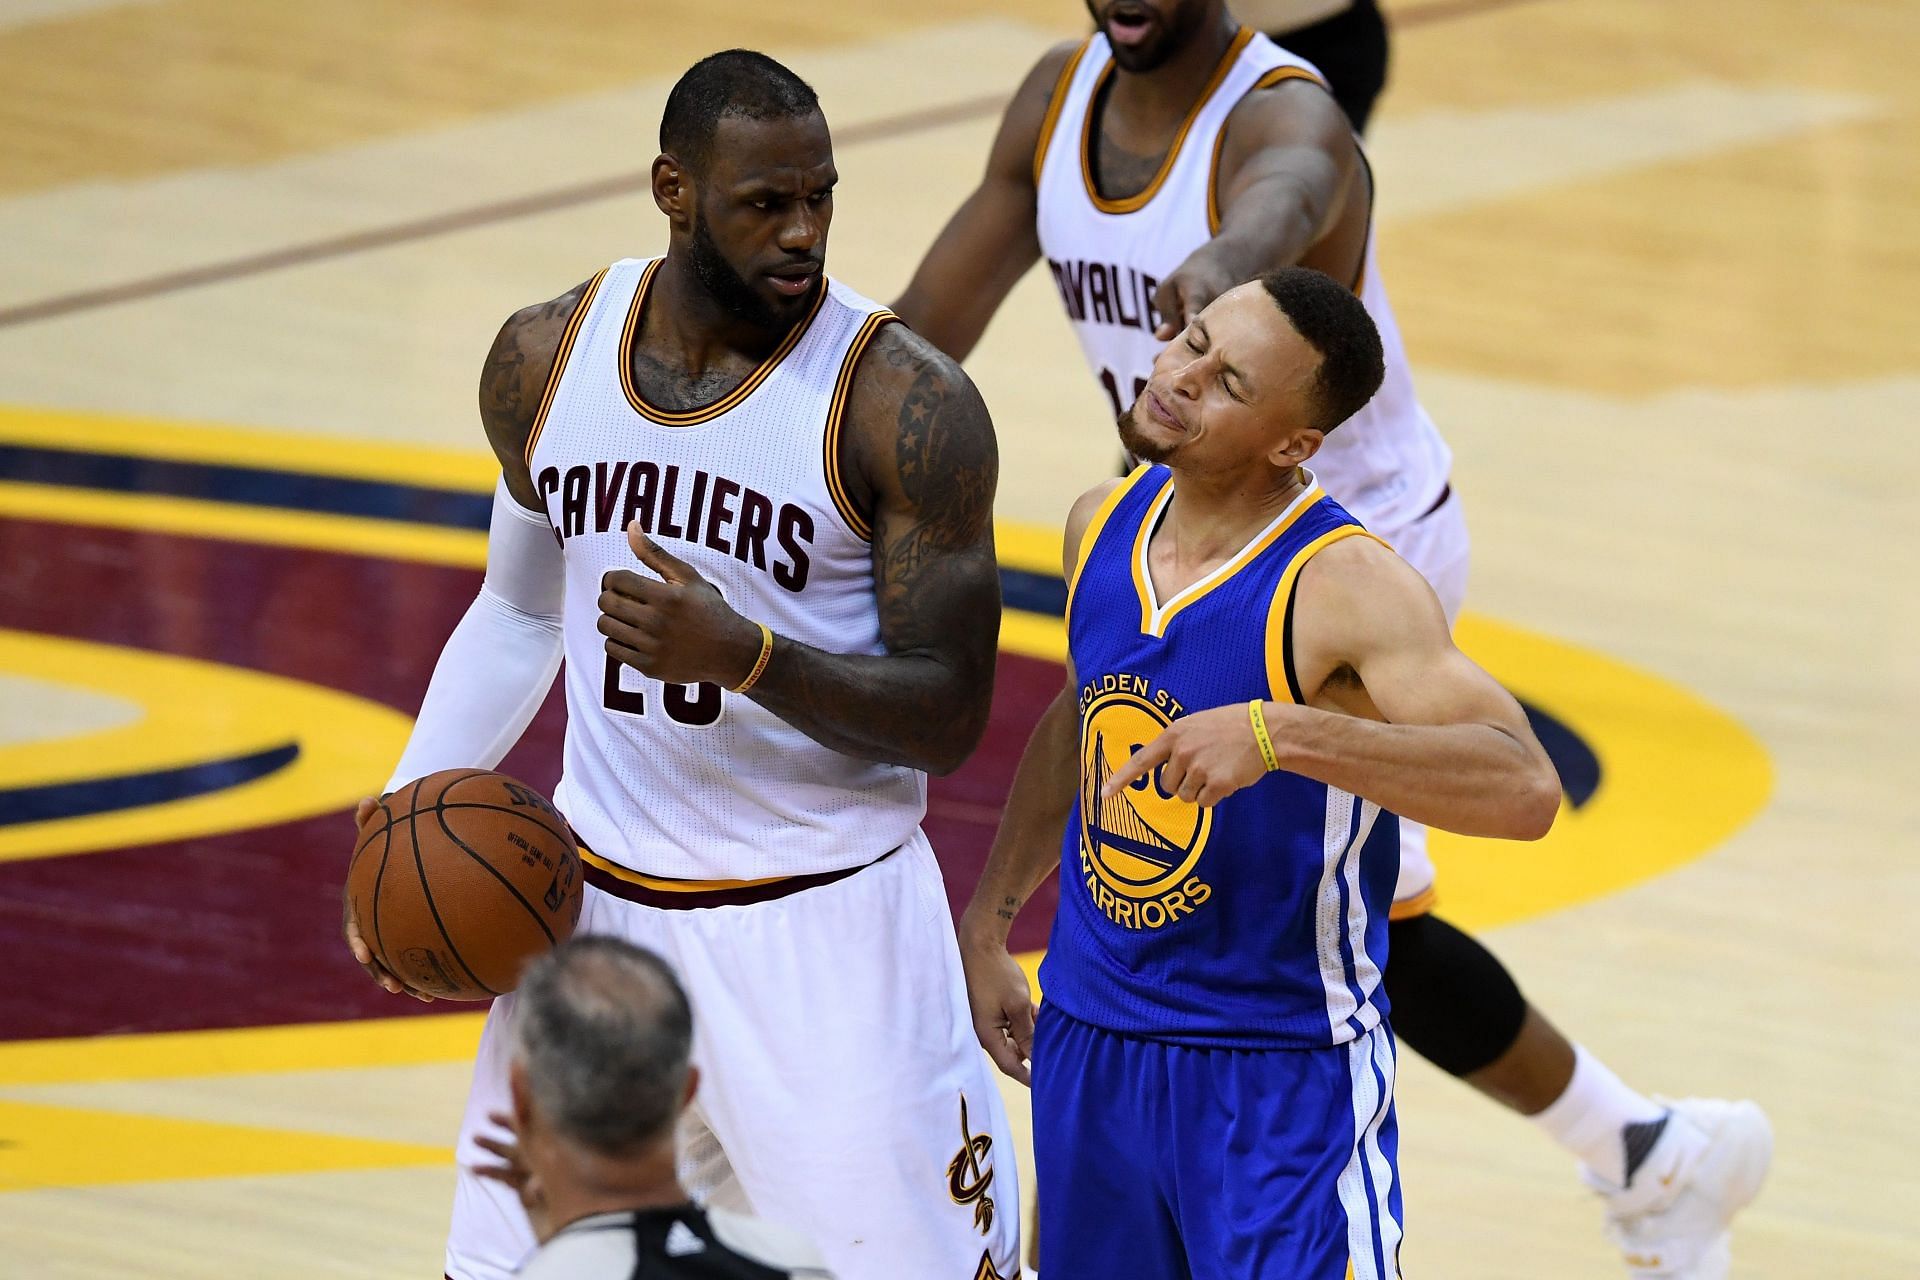 On this day, LeBron James shared a message with the Cavaliers about the Warriors&#039; mistake.